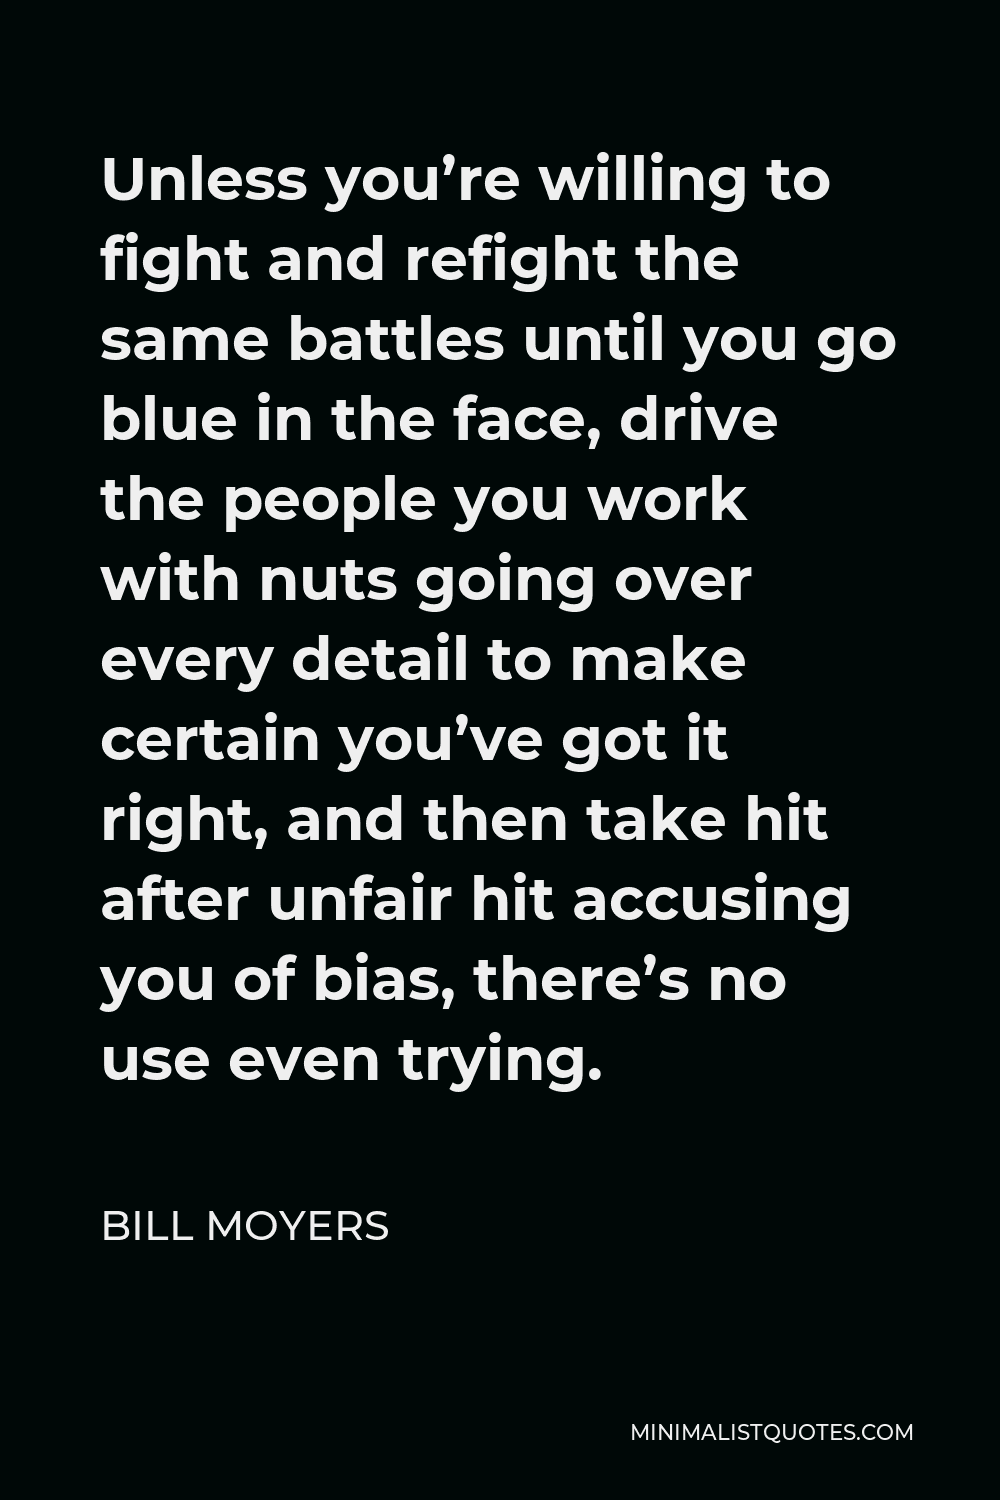 Bill Moyers Quote - Unless you’re willing to fight and refight the same battles until you go blue in the face, drive the people you work with nuts going over every detail to make certain you’ve got it right, and then take hit after unfair hit accusing you of bias, there’s no use even trying.